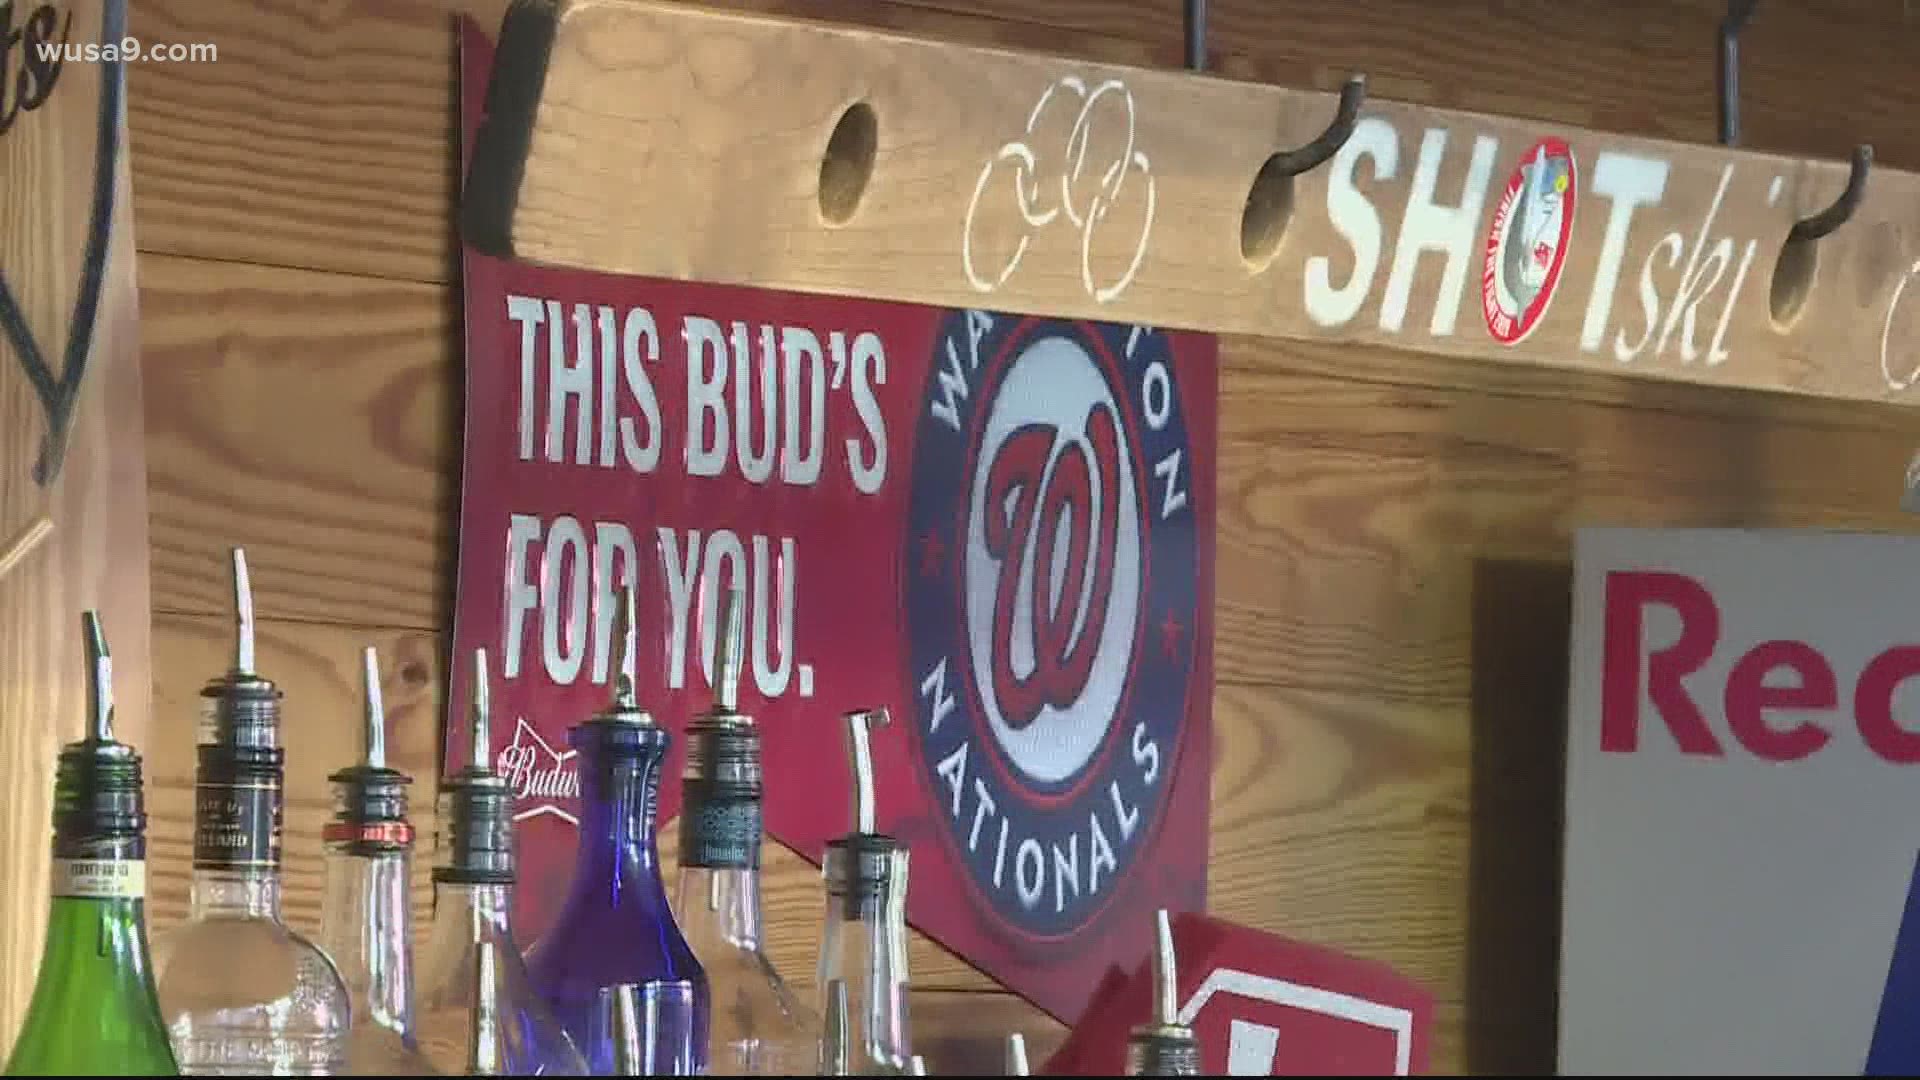 Ahead of a limited reopening at Nationals Park on Opening Day, bars and restaurants continued to get excited on Tuesday to welcome back more crowds this week.